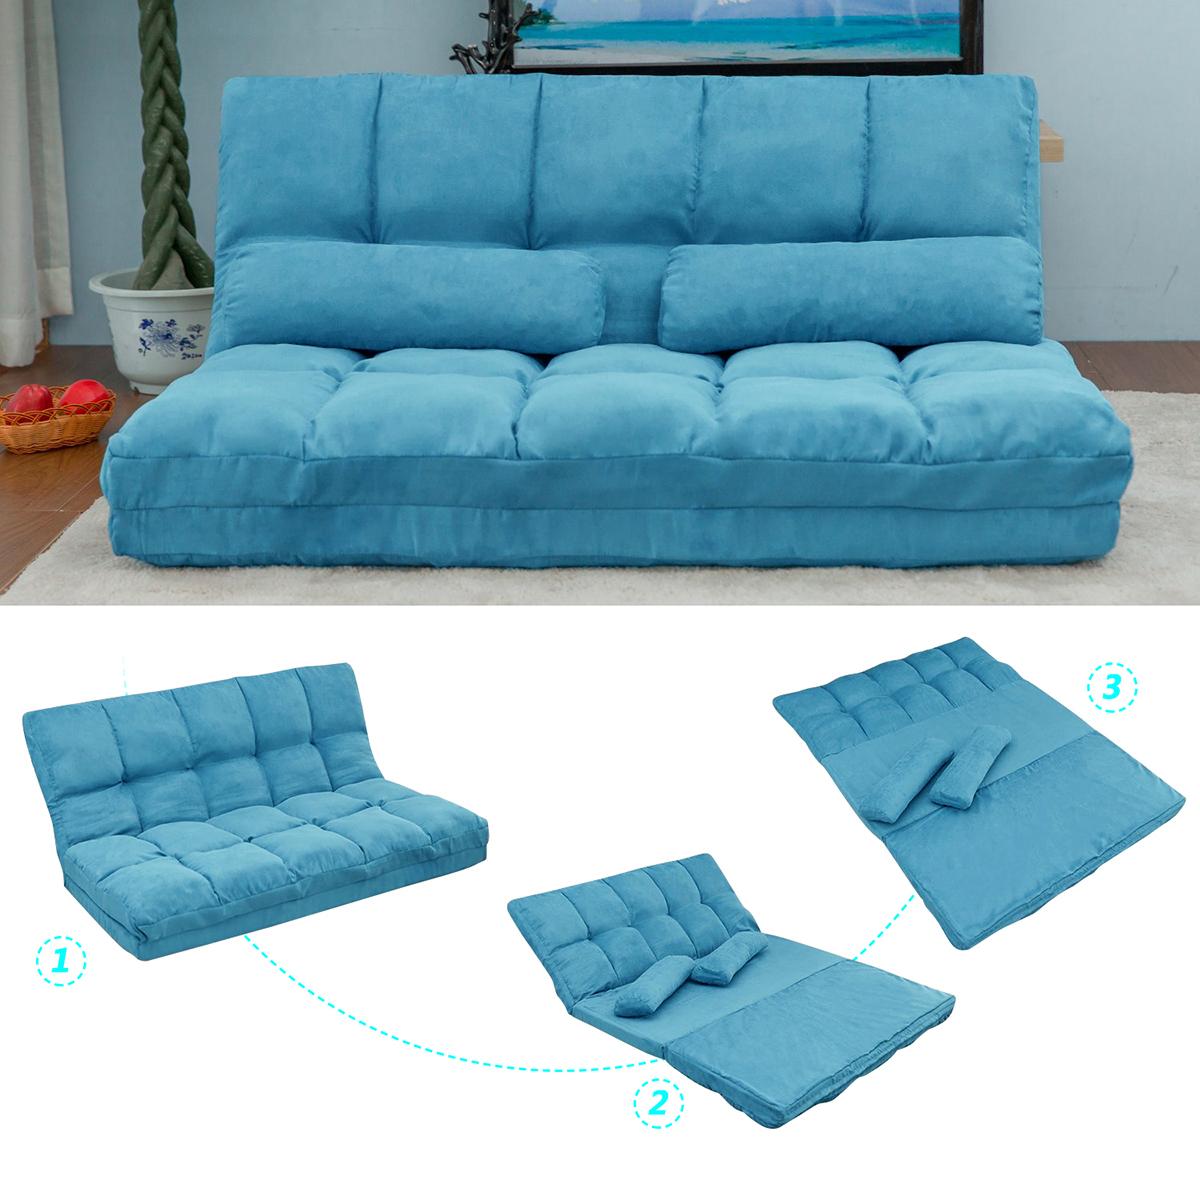 Fold Down Sofa Bed Lazy Sofa Floor Couch Adjustable Folding Modern Futon Chaise Video Gaming Lounge Convertible Upholstered Memory Foam Padded Cushion Guest Sleeper Chair with Two Pillows, Blue - image 4 of 7